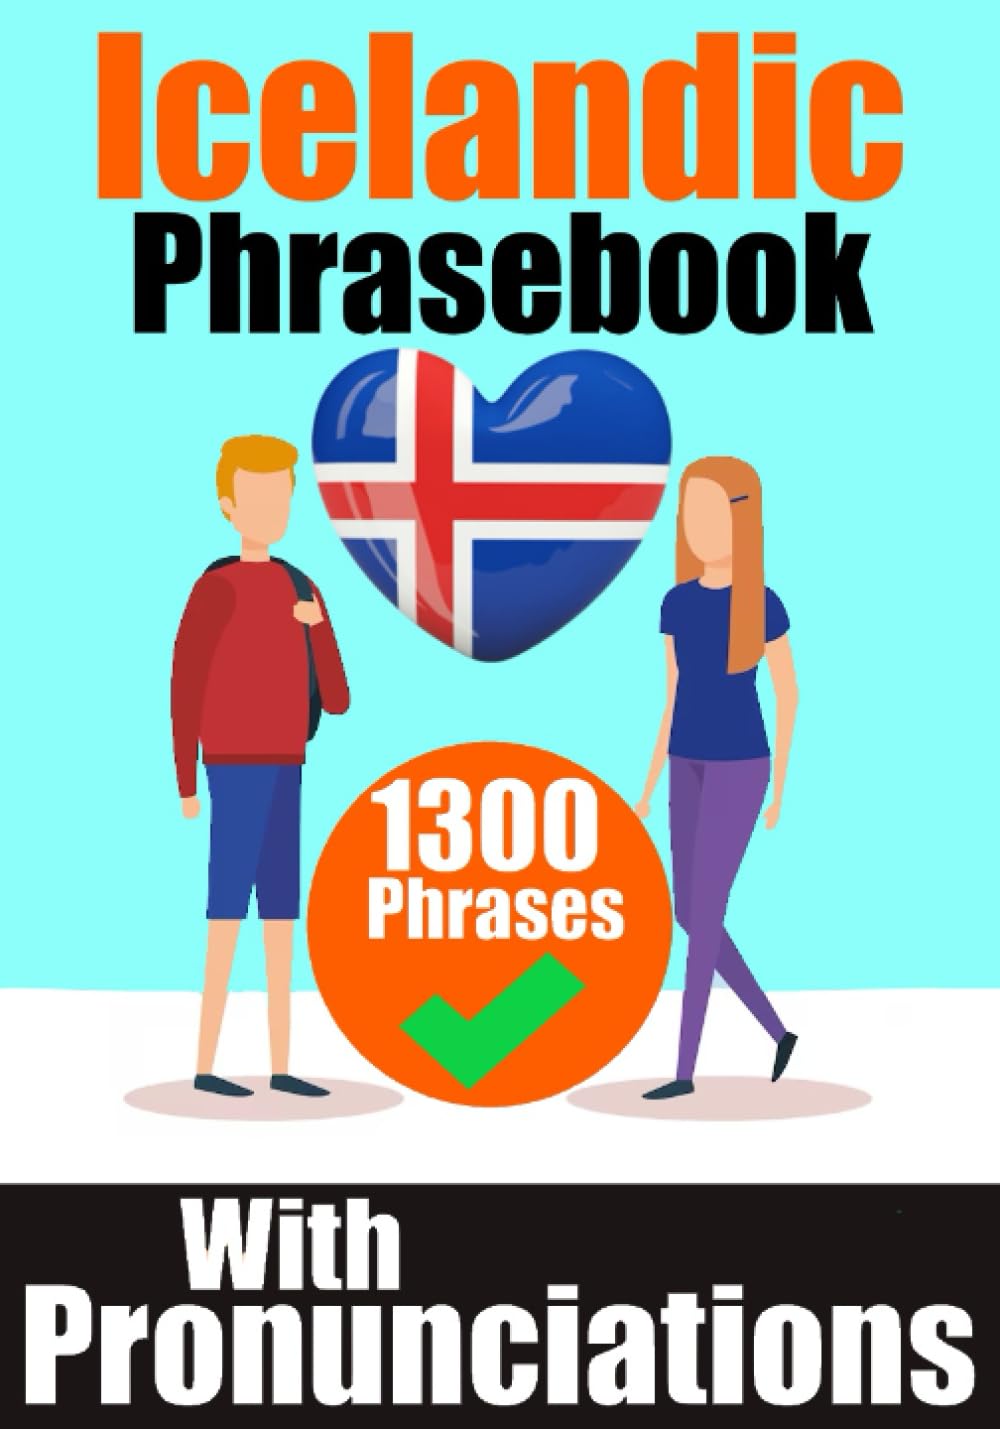 Icelandic Phrasebook: 1300 Sentences with English Translations and Pronunciation Guide